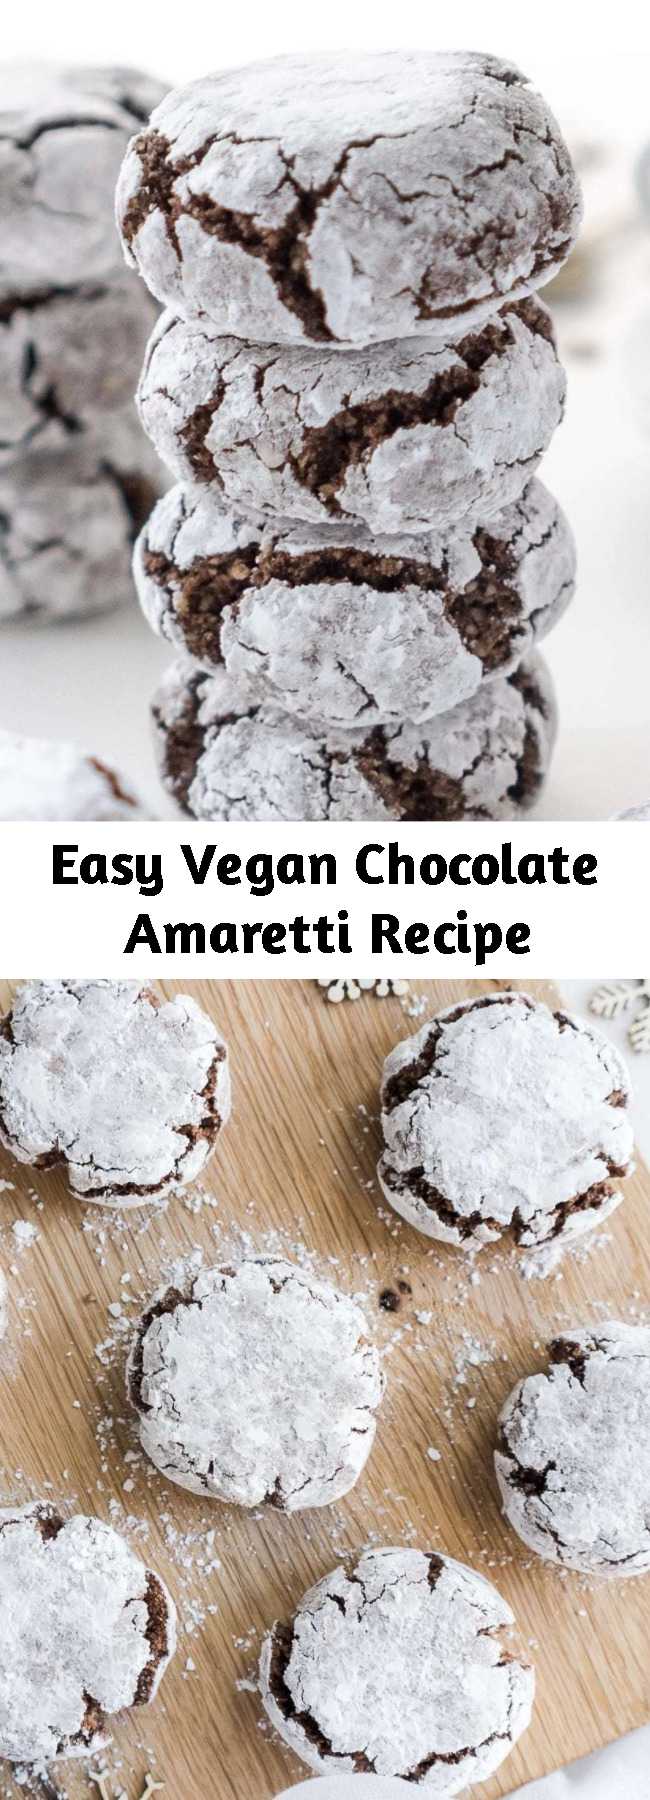 Easy Vegan Chocolate Amaretti Recipe - The perfect homemade cookies for Christmas! These irresistible vegan, gluten-free chocolate amaretti are super easy to make, crunchy on the outside and soft on the inside.